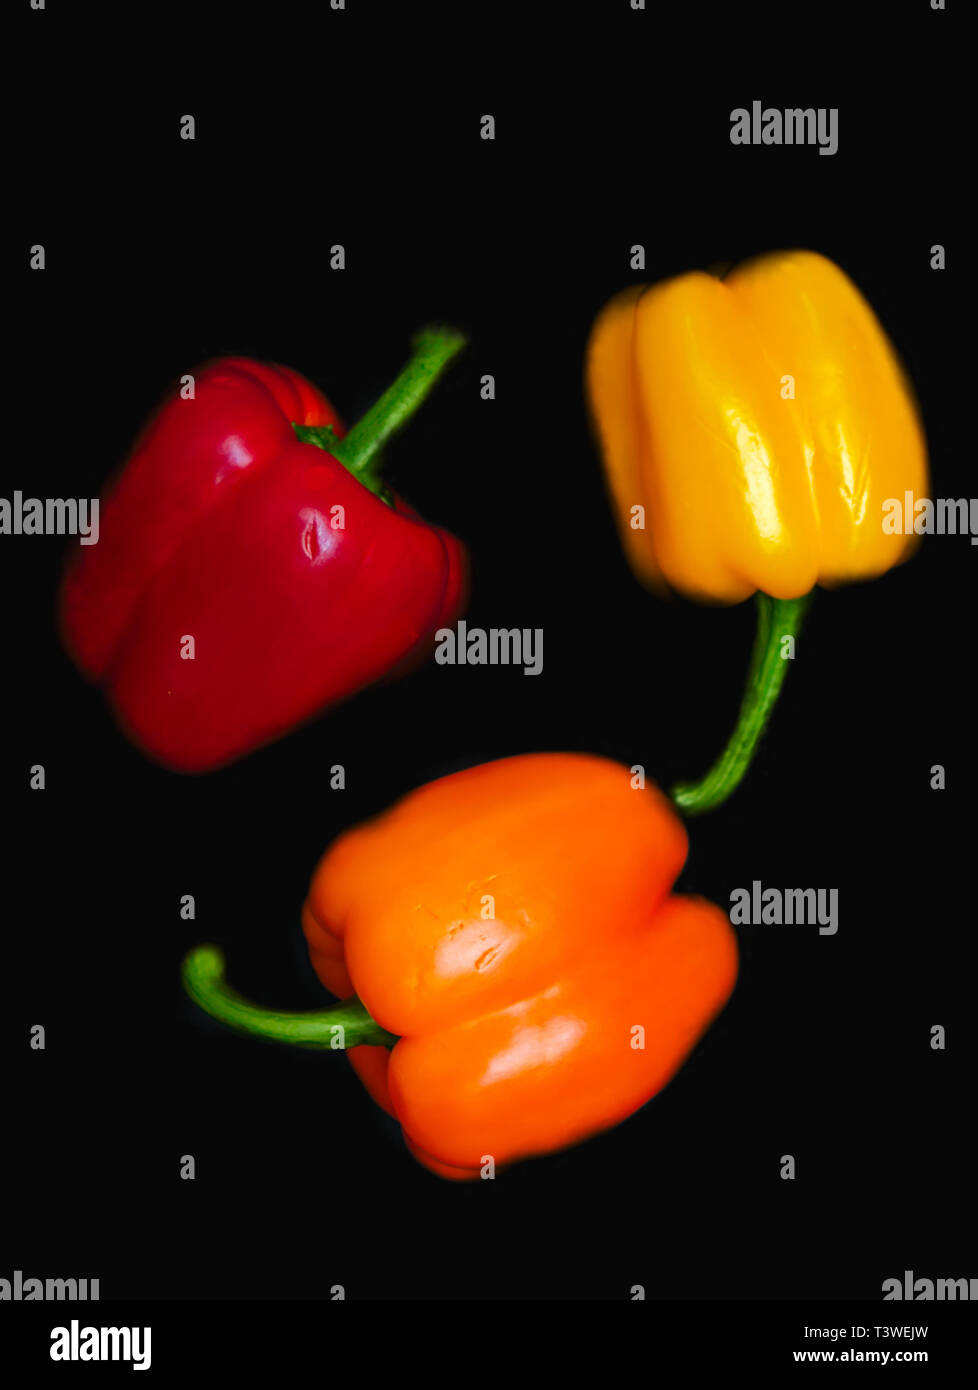 Vivid colorful shiny peppers on black background. Vegetables forming a circle. Red yellow and orange vibrant colors. Stock Photo